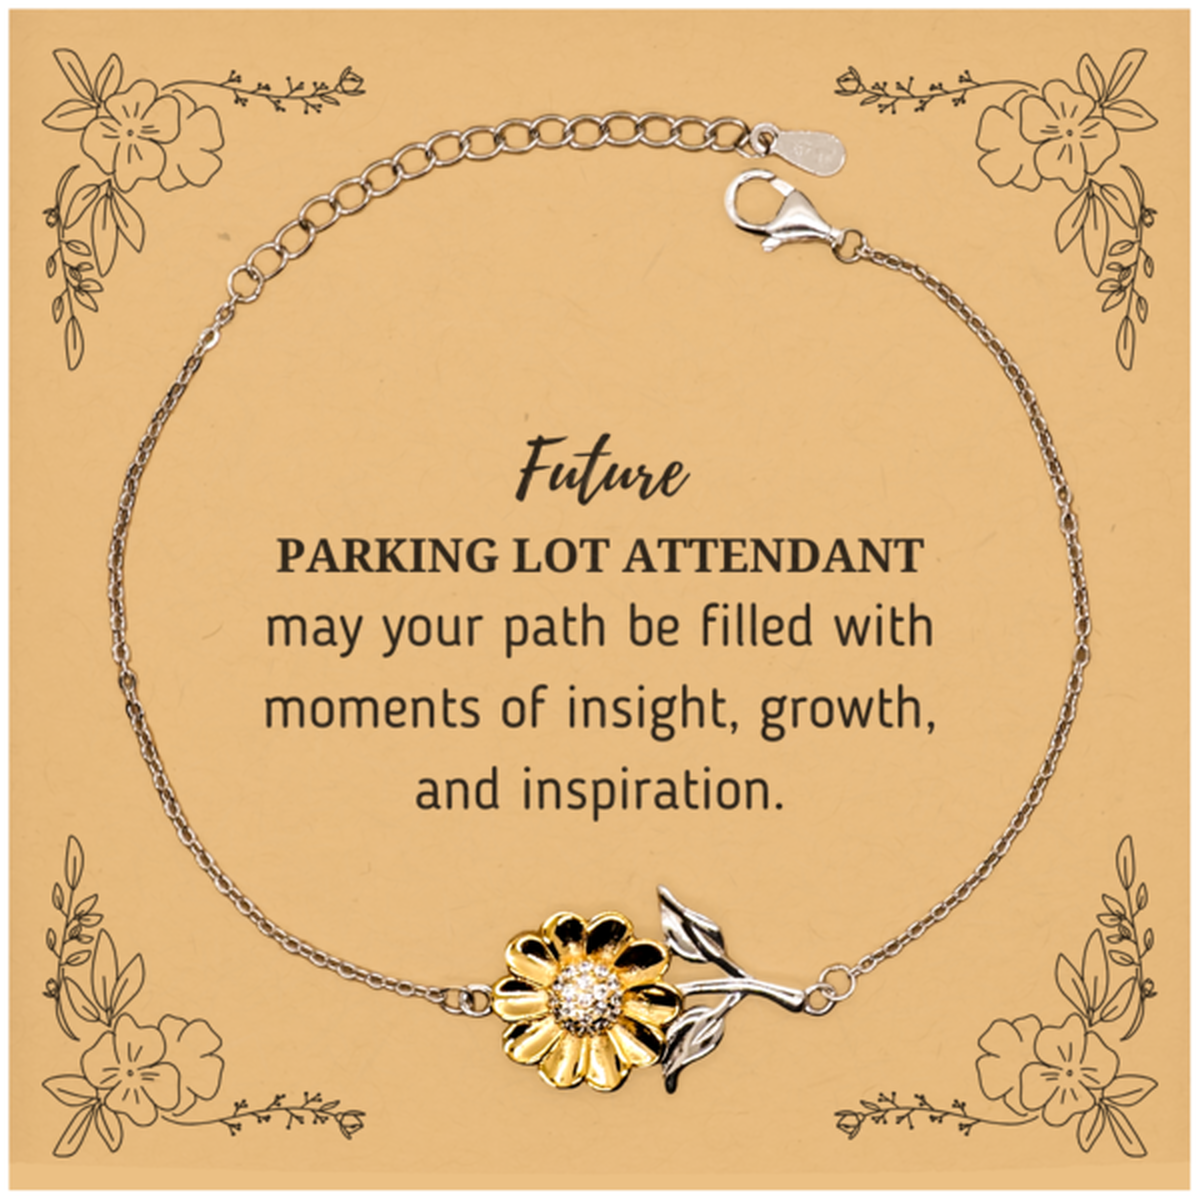 Future Parking Lot Attendant Gifts, May your path be filled with moments of insight, Graduation Gifts for New Parking Lot Attendant, Christmas Unique Sunflower Bracelet For Men, Women, Friends